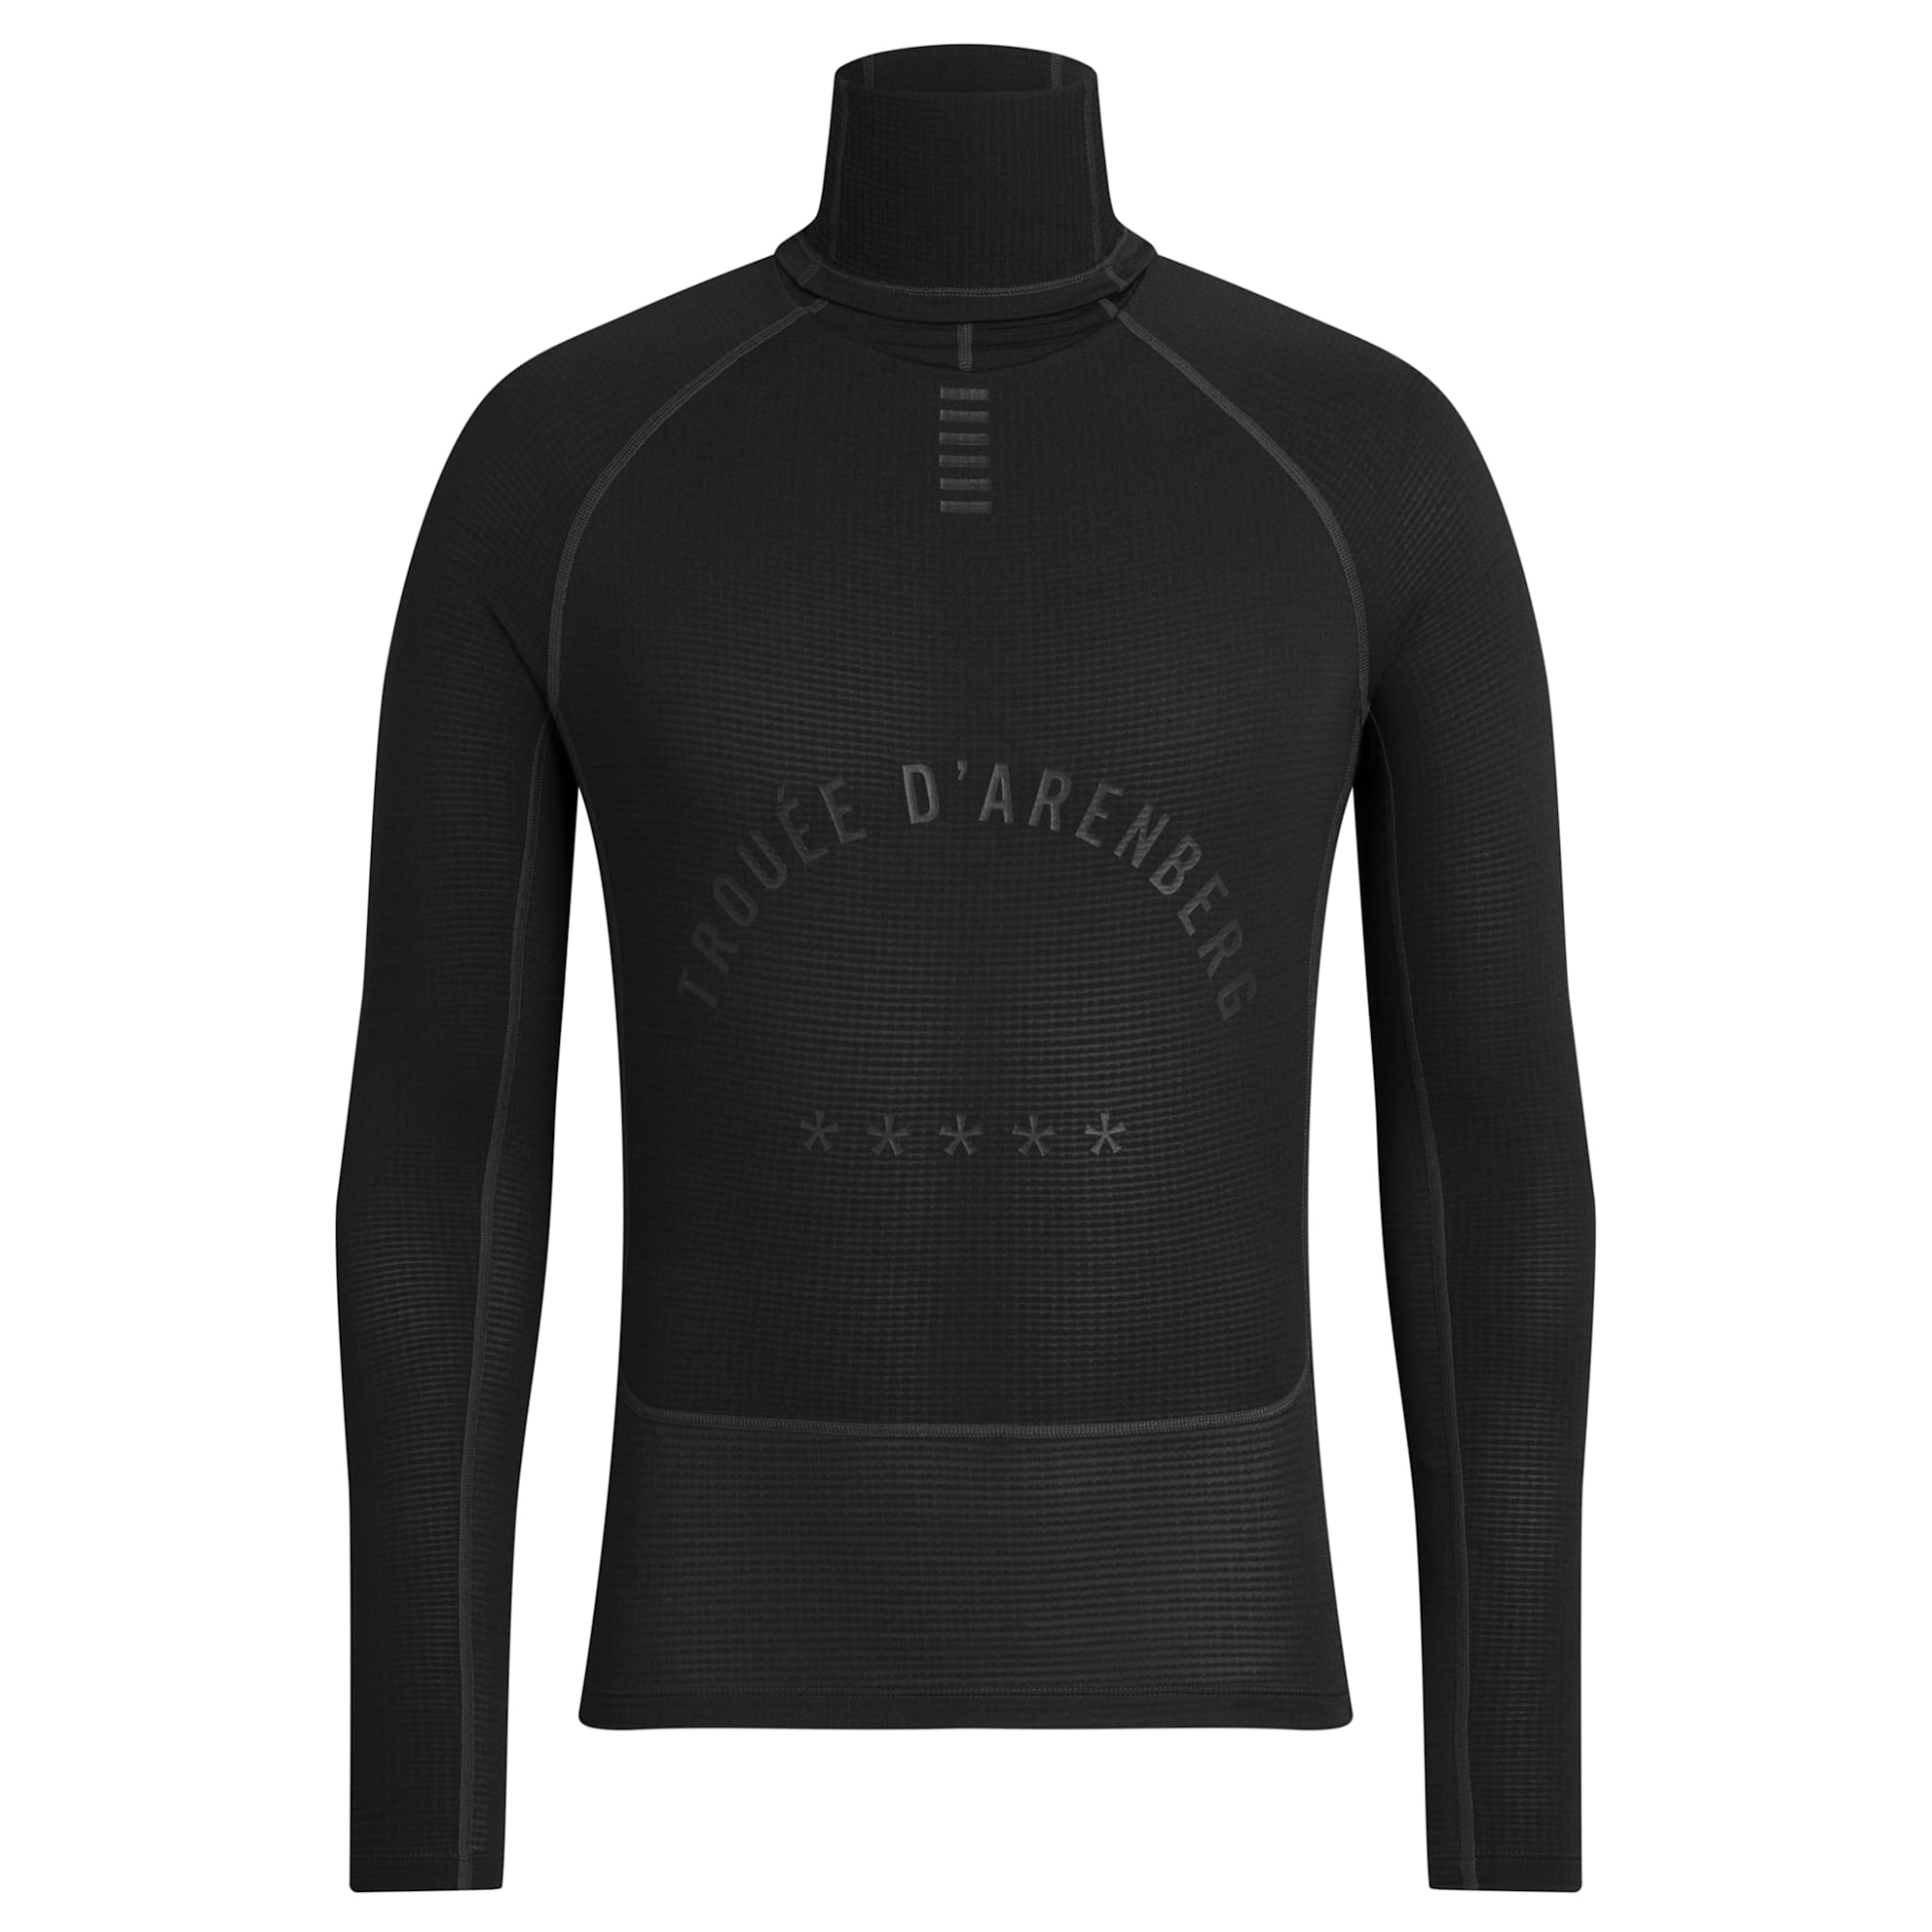 Men's Pro Team Thermal Base Layer - Long Sleeve